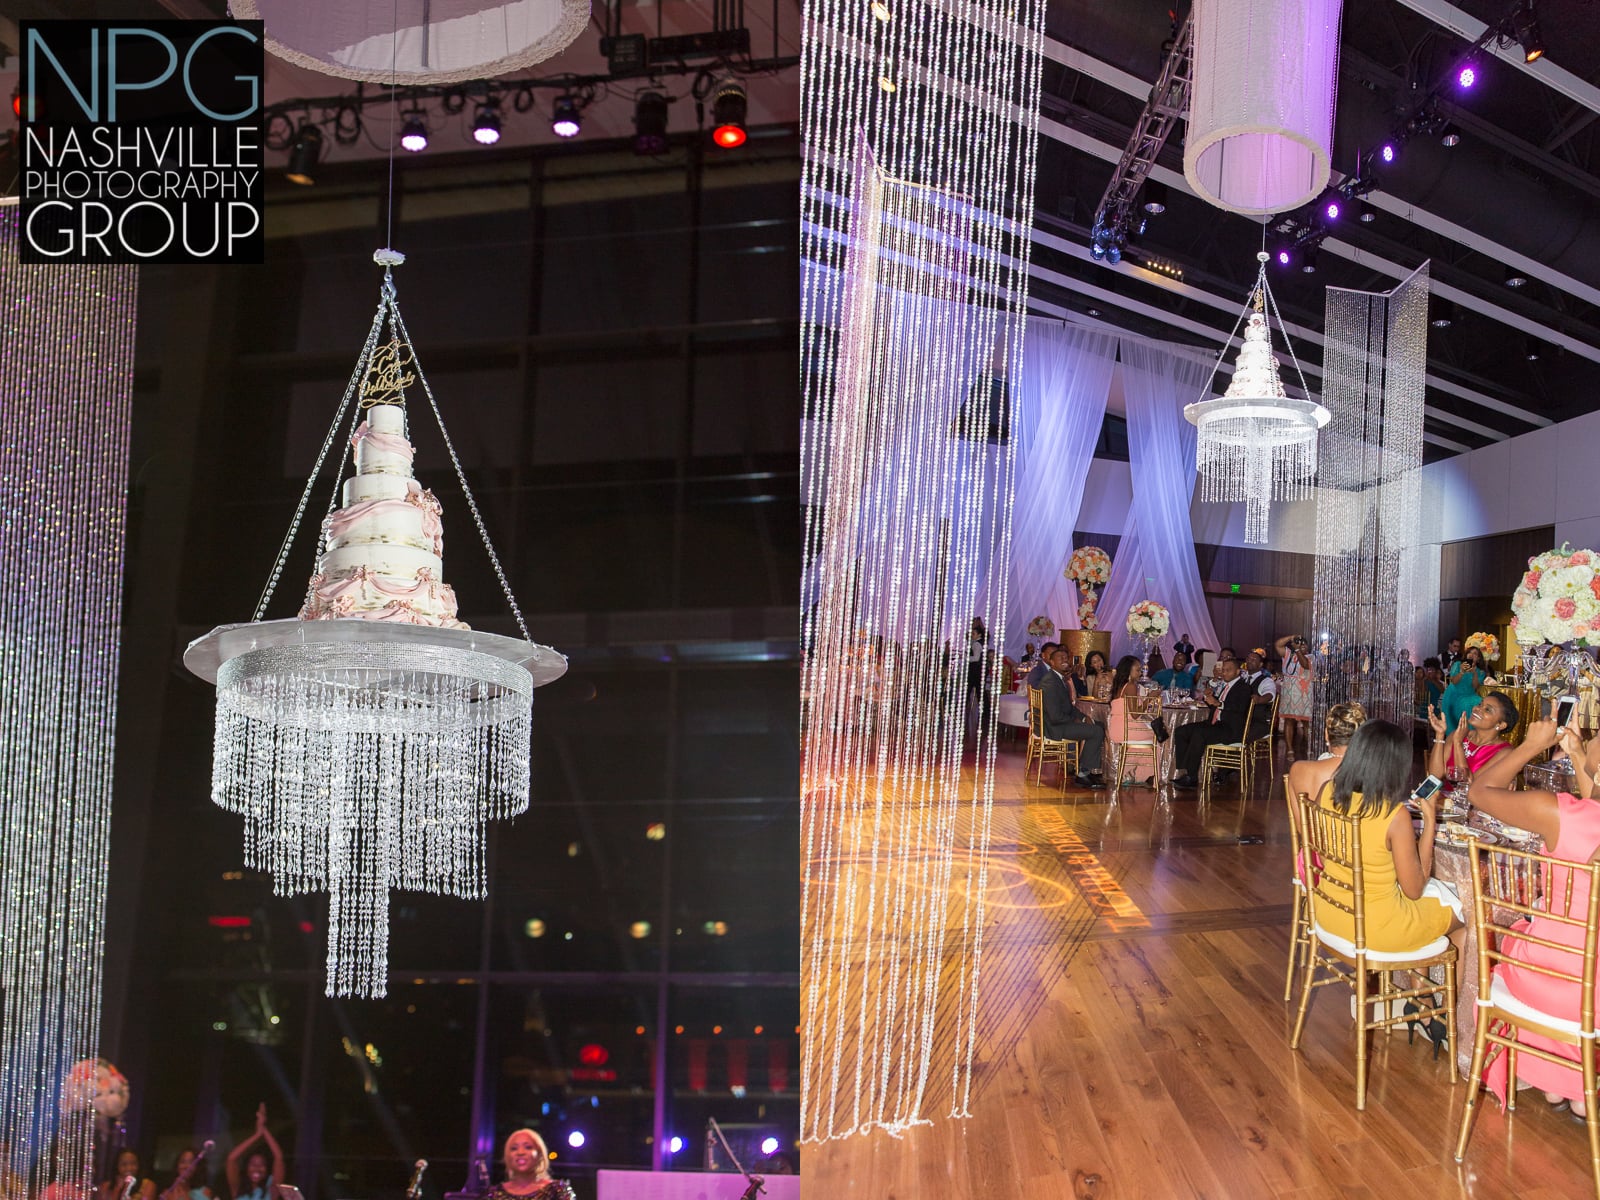 Jay Qualls of the Frosted Affair created a one of a kind wedding cake chandelier.